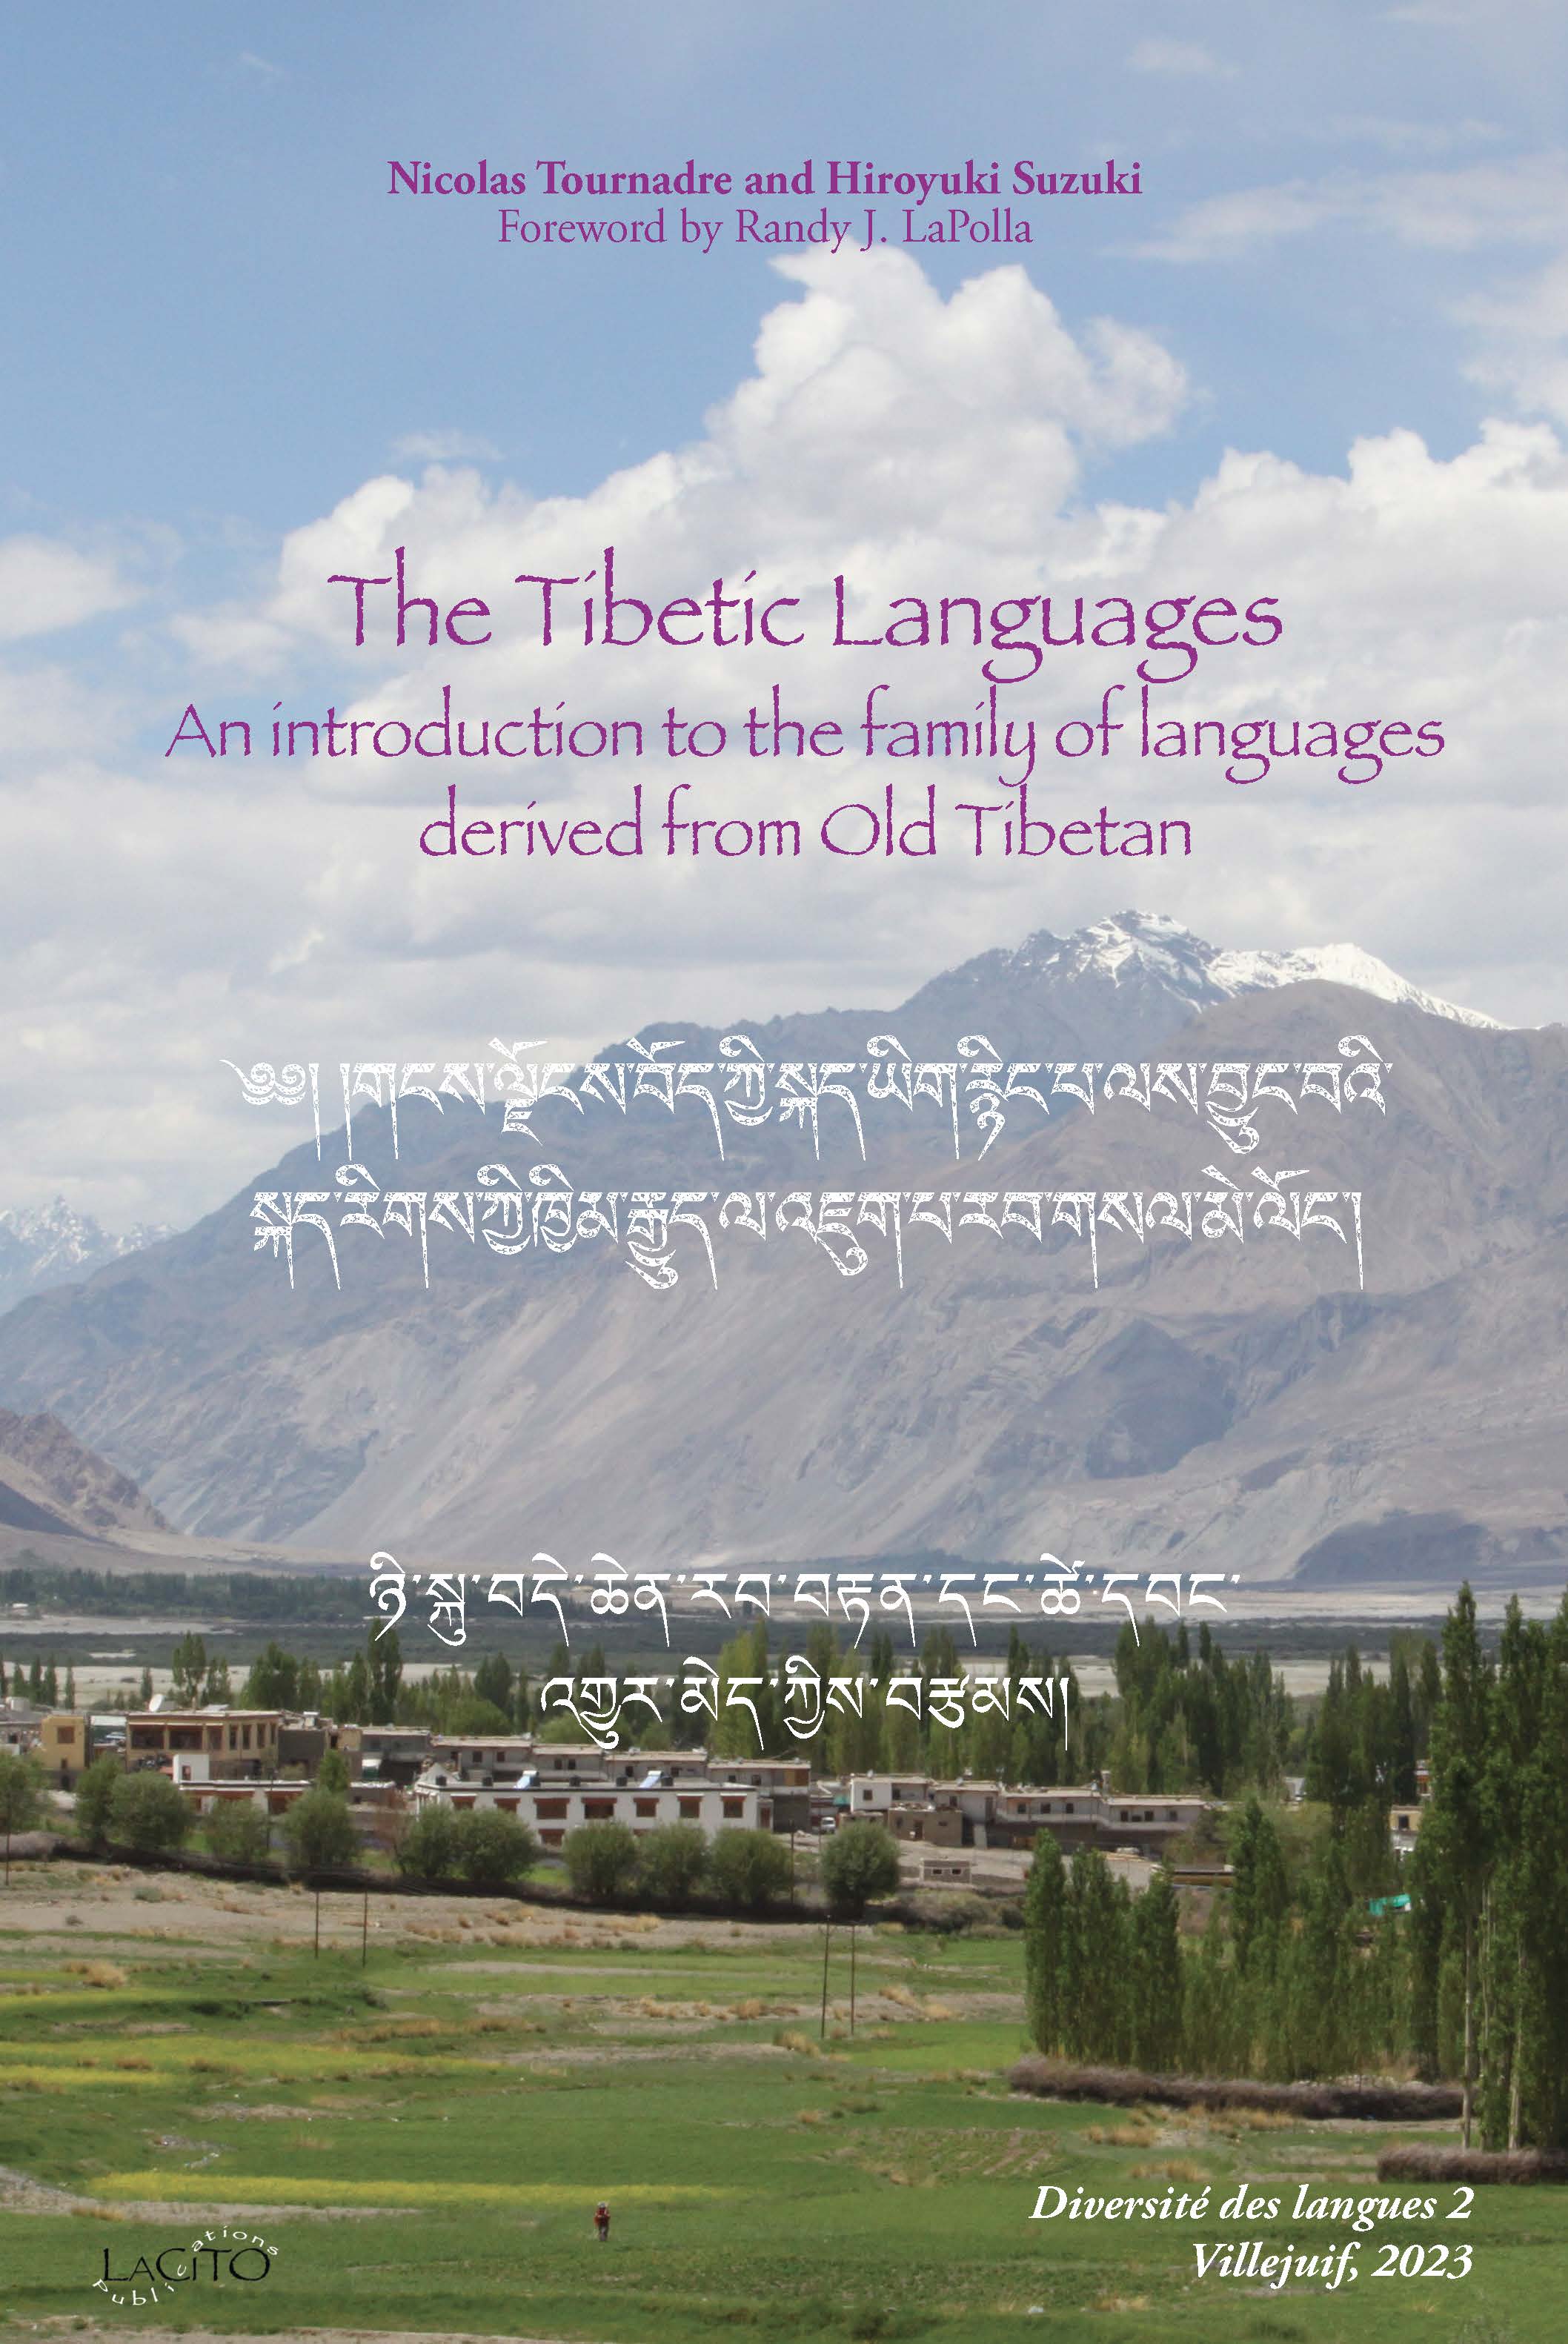 Tournadre-2023-The Tibetic Languages-front.jpg